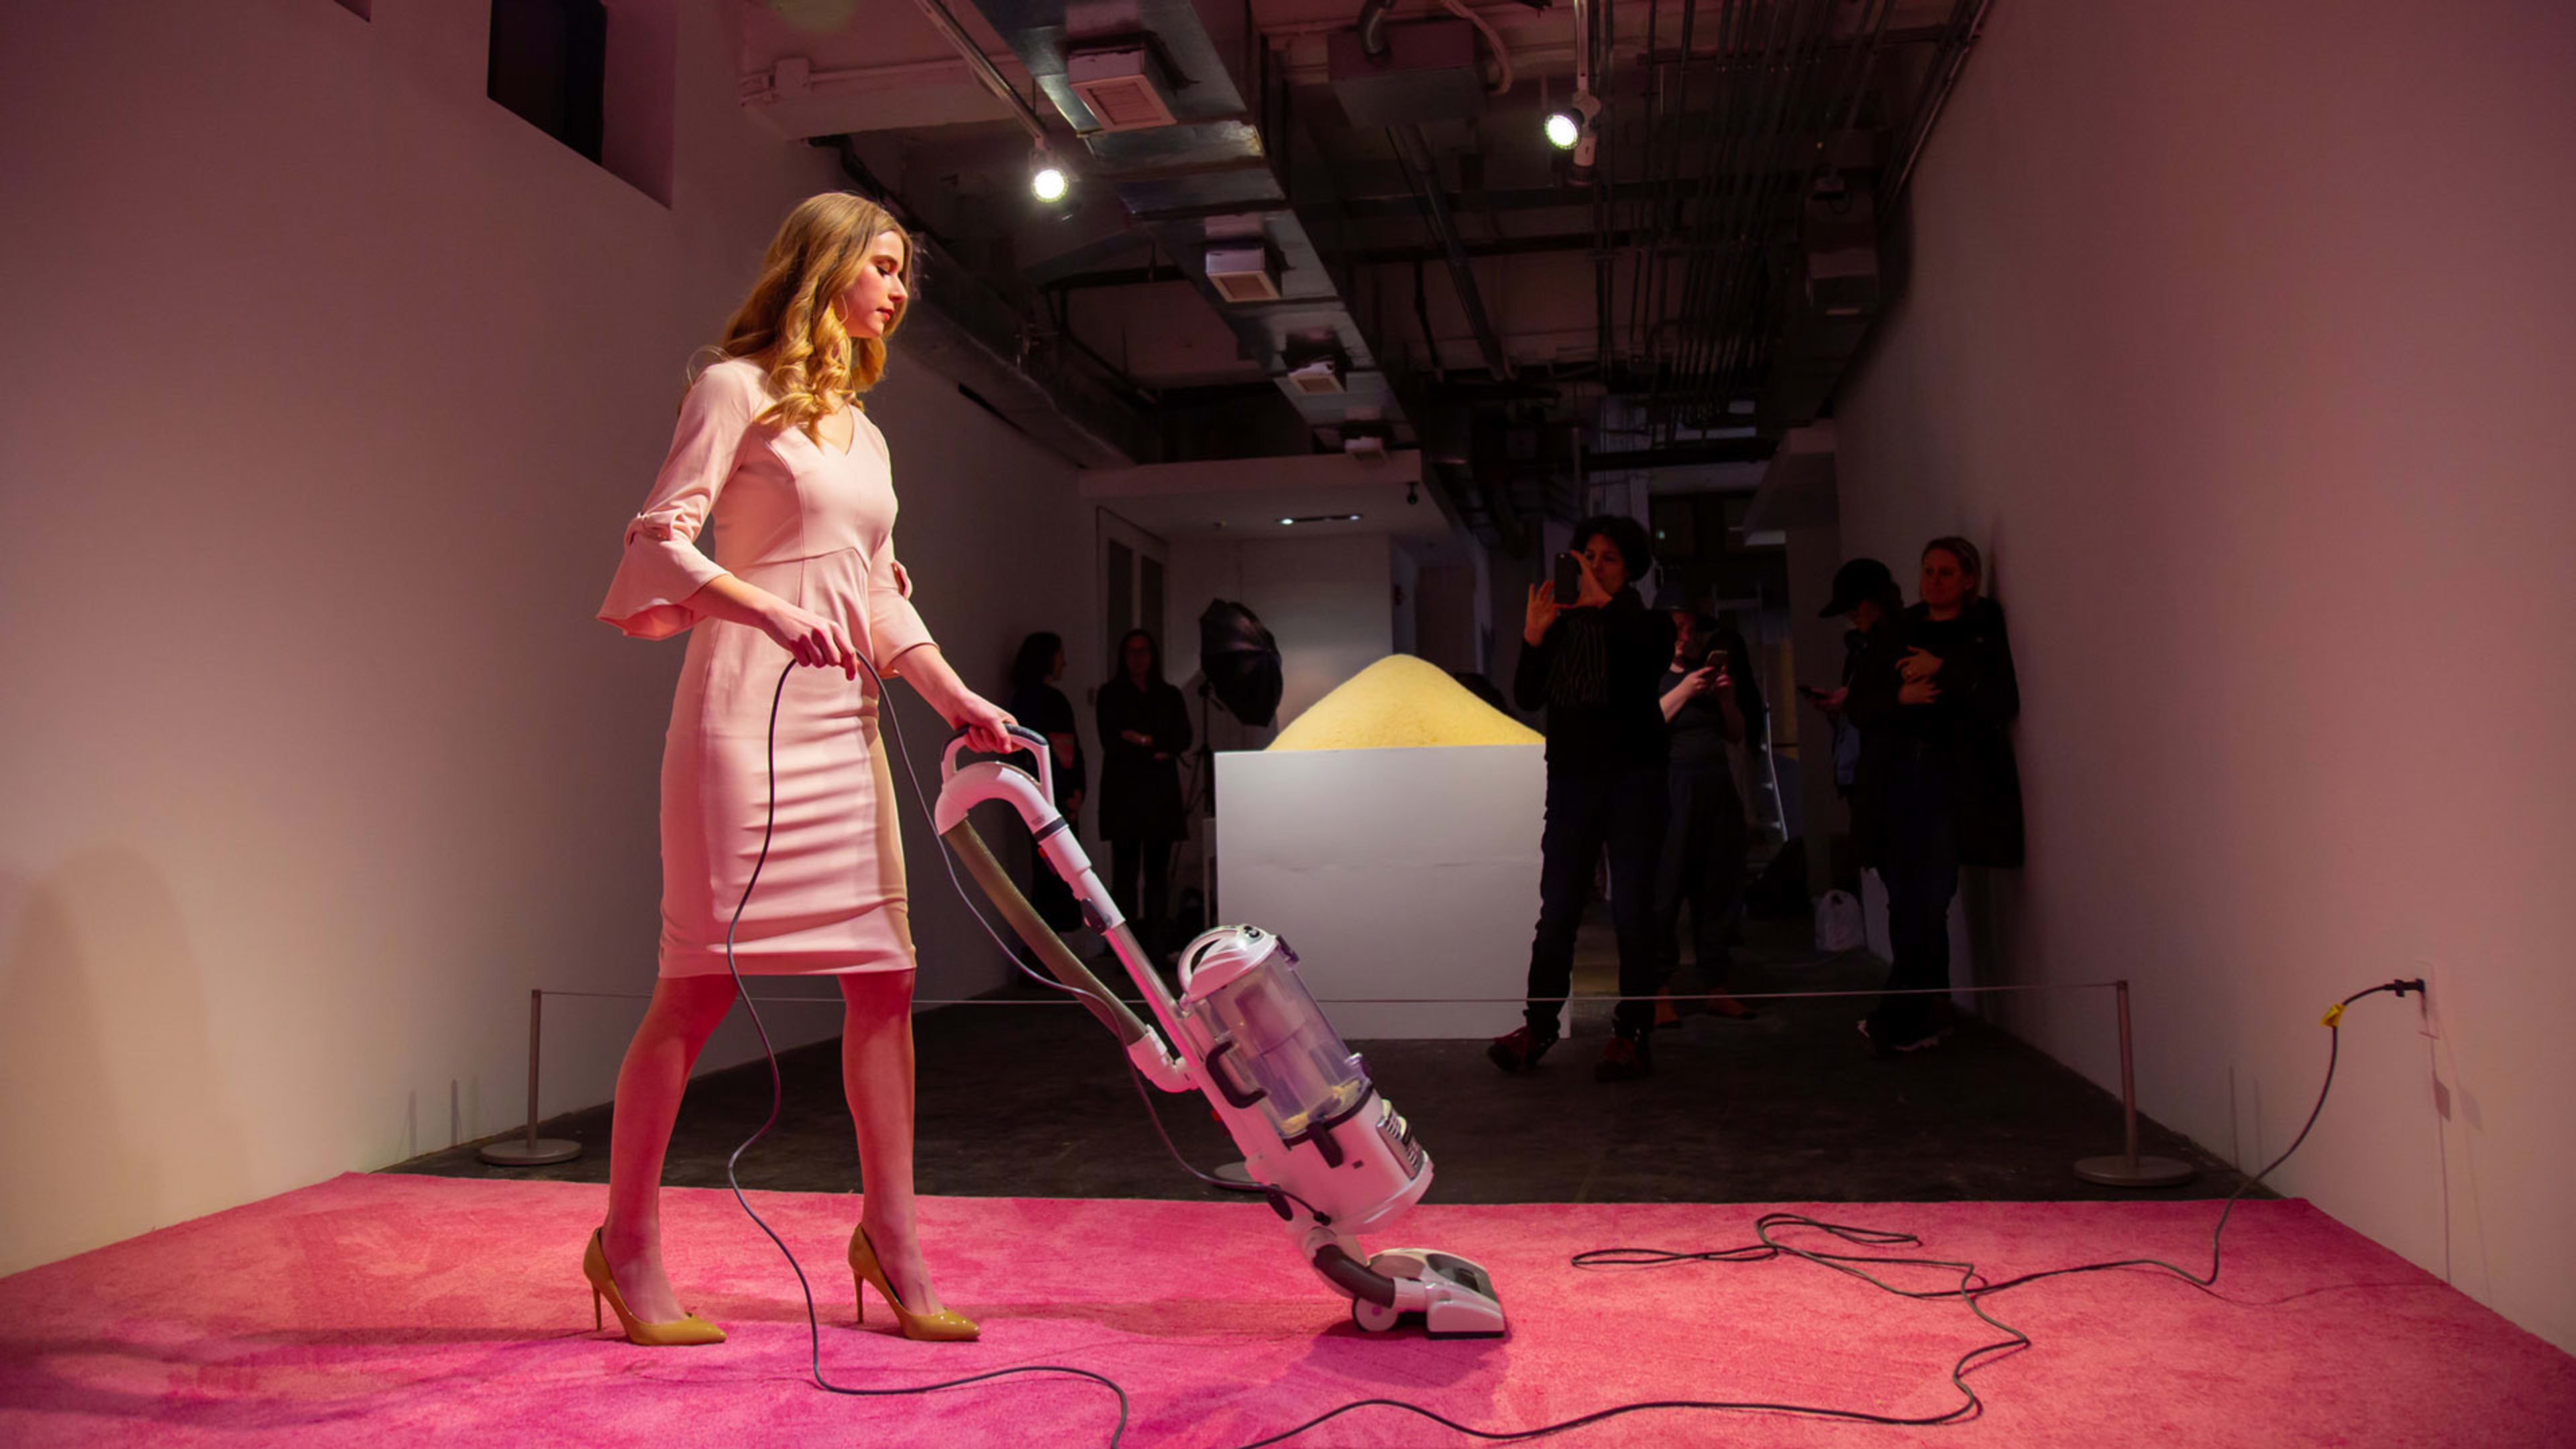 “Ivanka Vacuuming” is art for our time